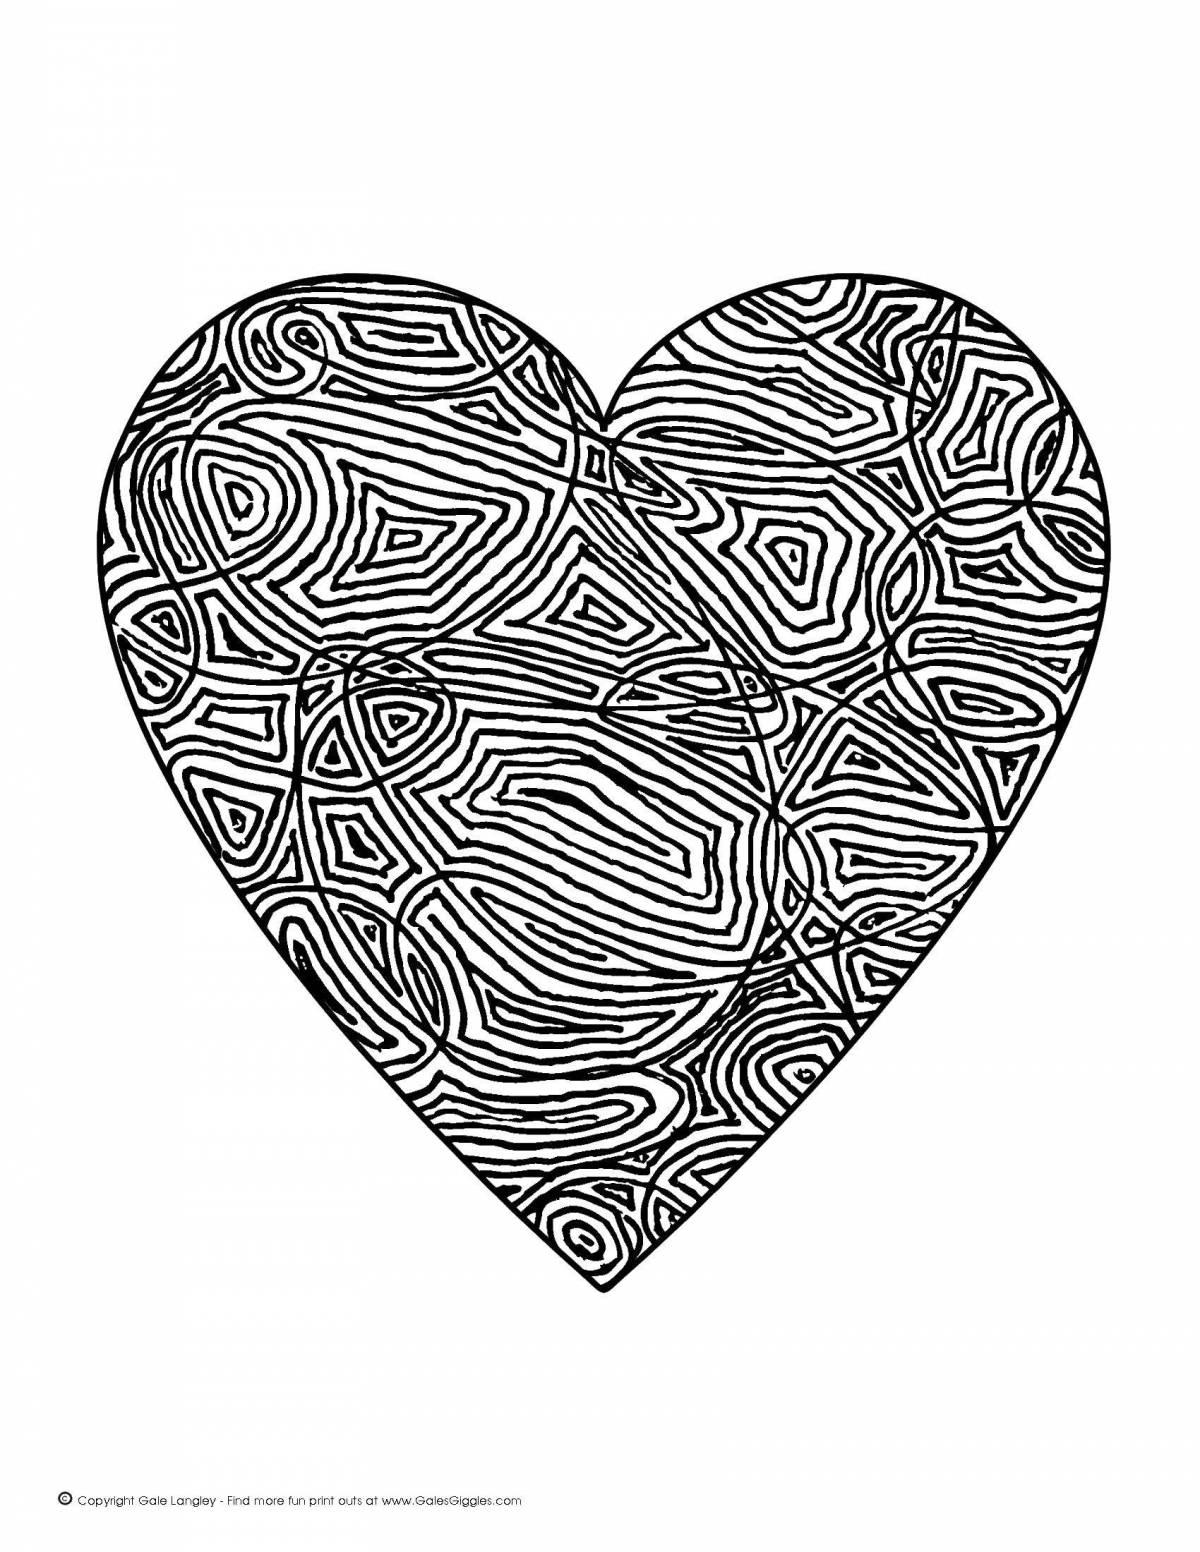 Hypnotic heart coloring page